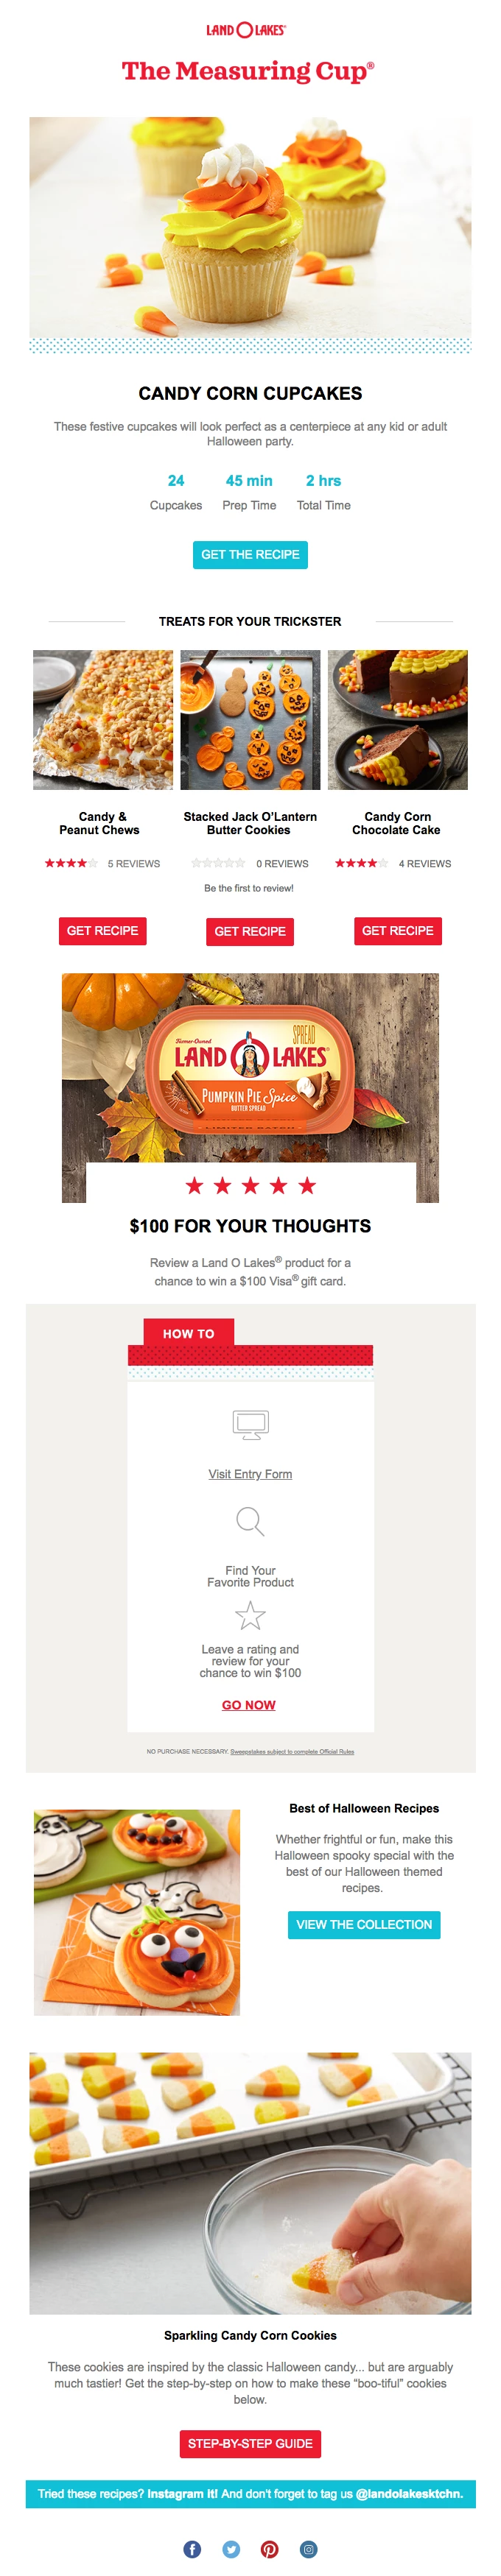 land o' lakes Halloween email with recipes 